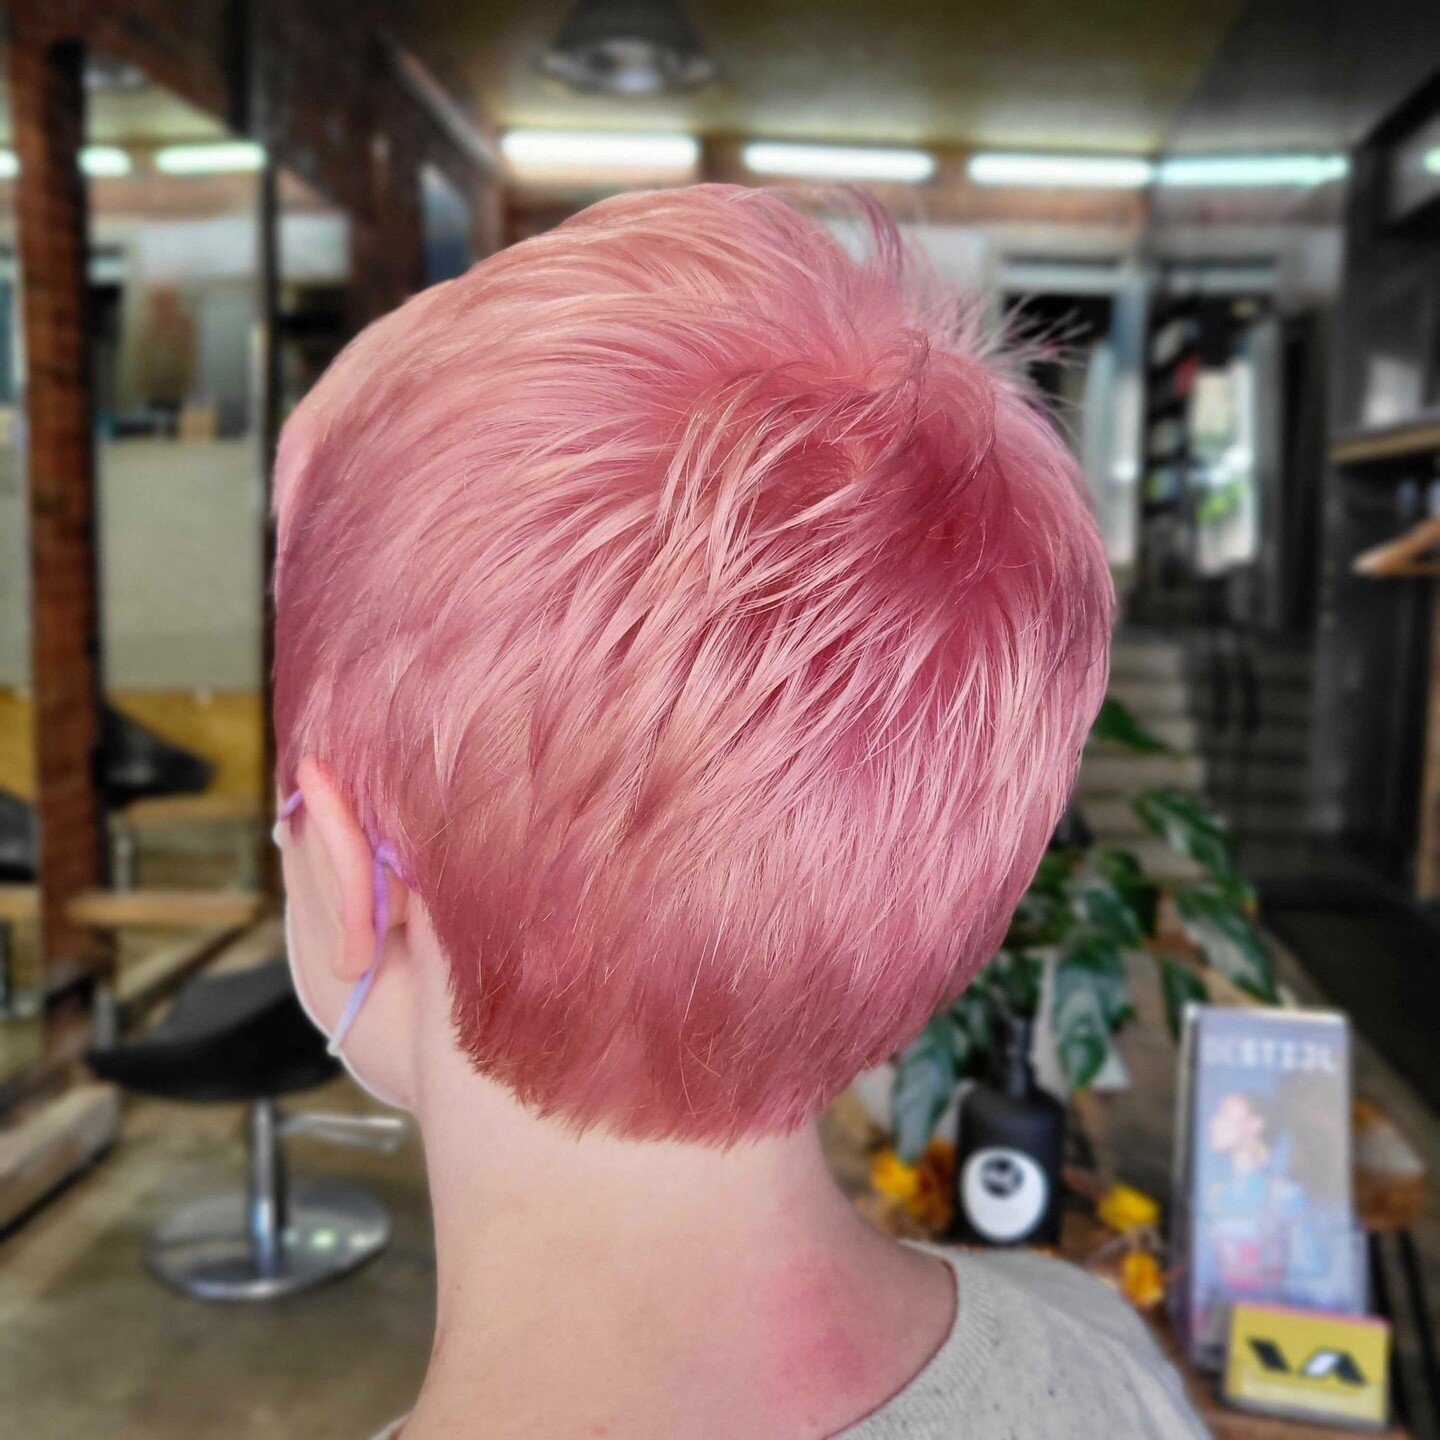 🍧🧁💗🌷⁠
⁠
This cotton candy / fairy floss pixie do is EVERYTHING!! @mfids you kill it! This makes Dee want to cut her hair into a bob and recreate this pink dream!! Anyone else?! ⁠
⁠
⁠
⁠
⁠
⁠
⁠
#destijlhairsalon #destijlthatselfie #shorthairideas #p